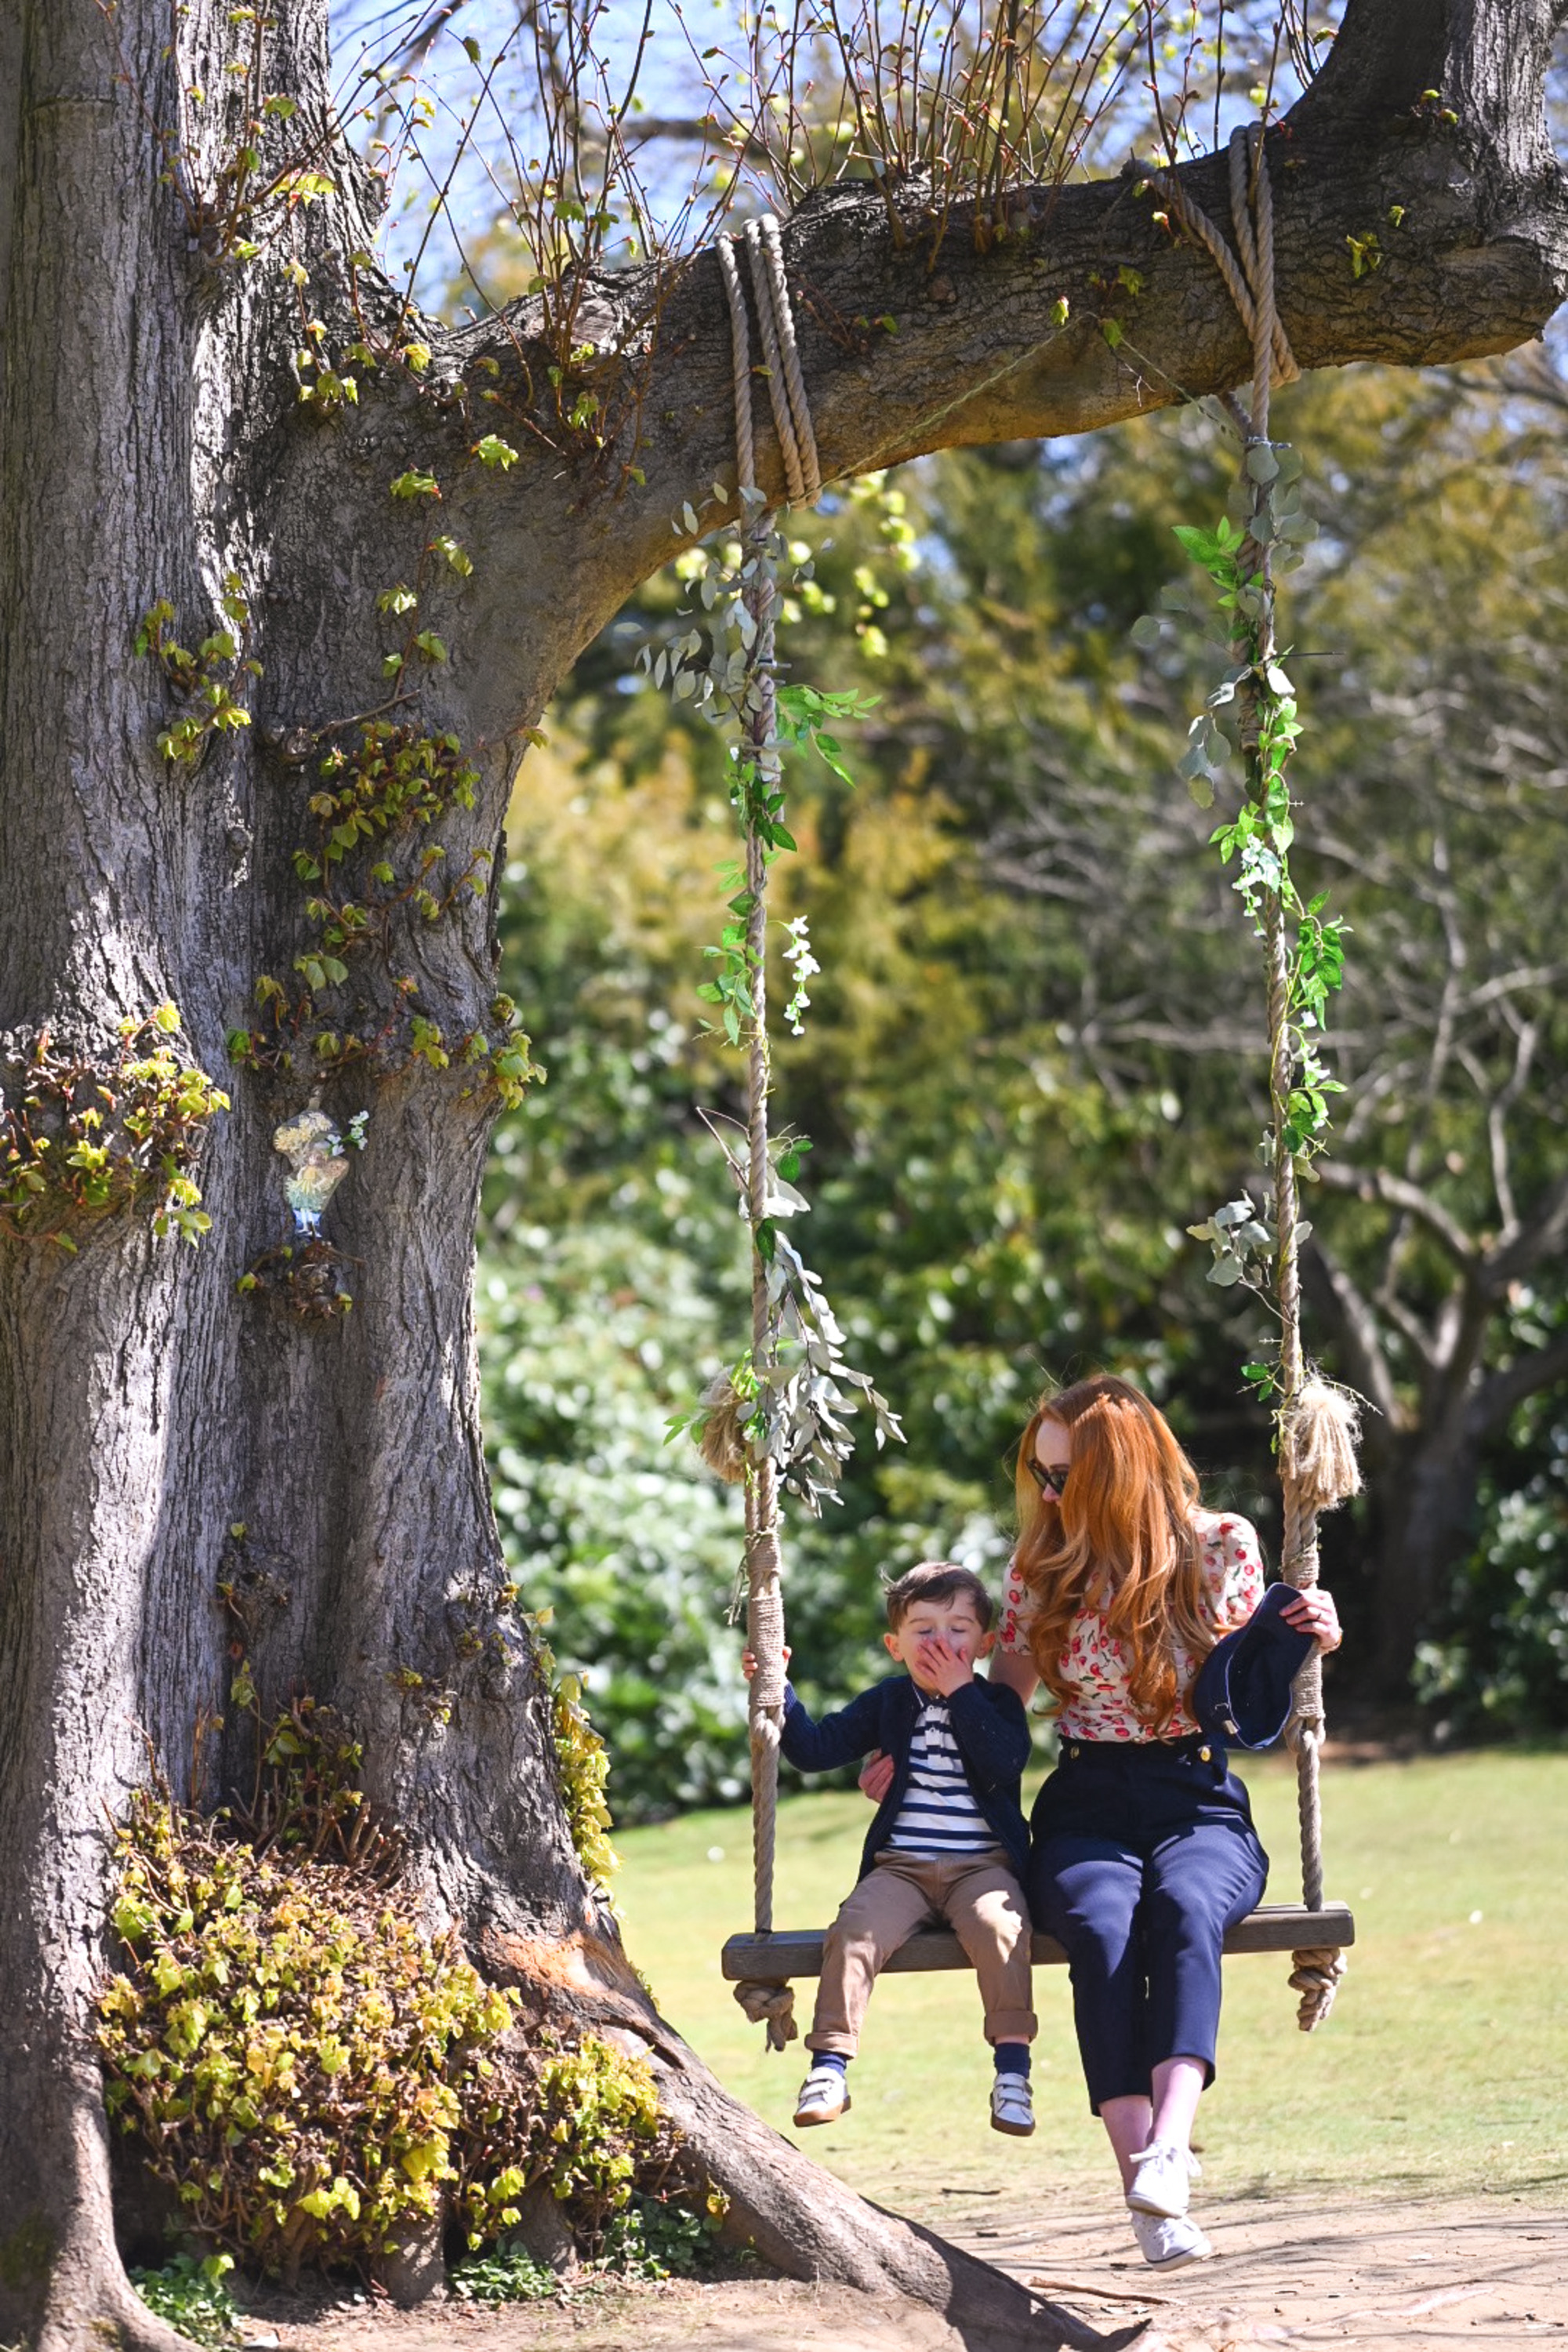 Amber and Max on a tree swing, Spring 2021